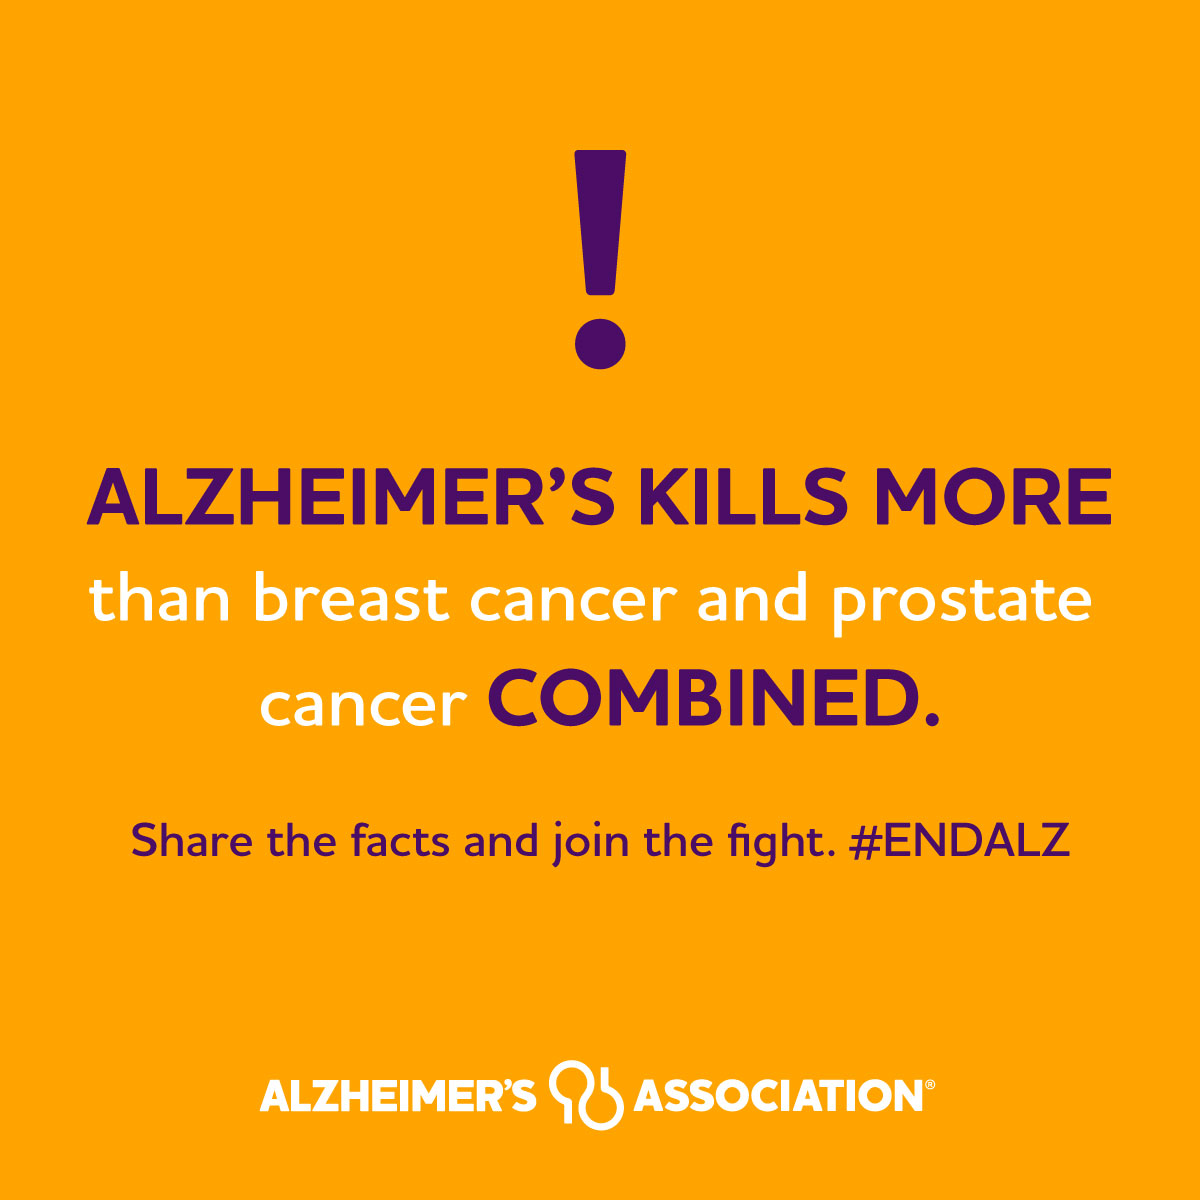 We cannot watch Alzheimer’s continue to take our loved ones. Share the facts and raise awareness to #ENDALZ: alz.org/facts.